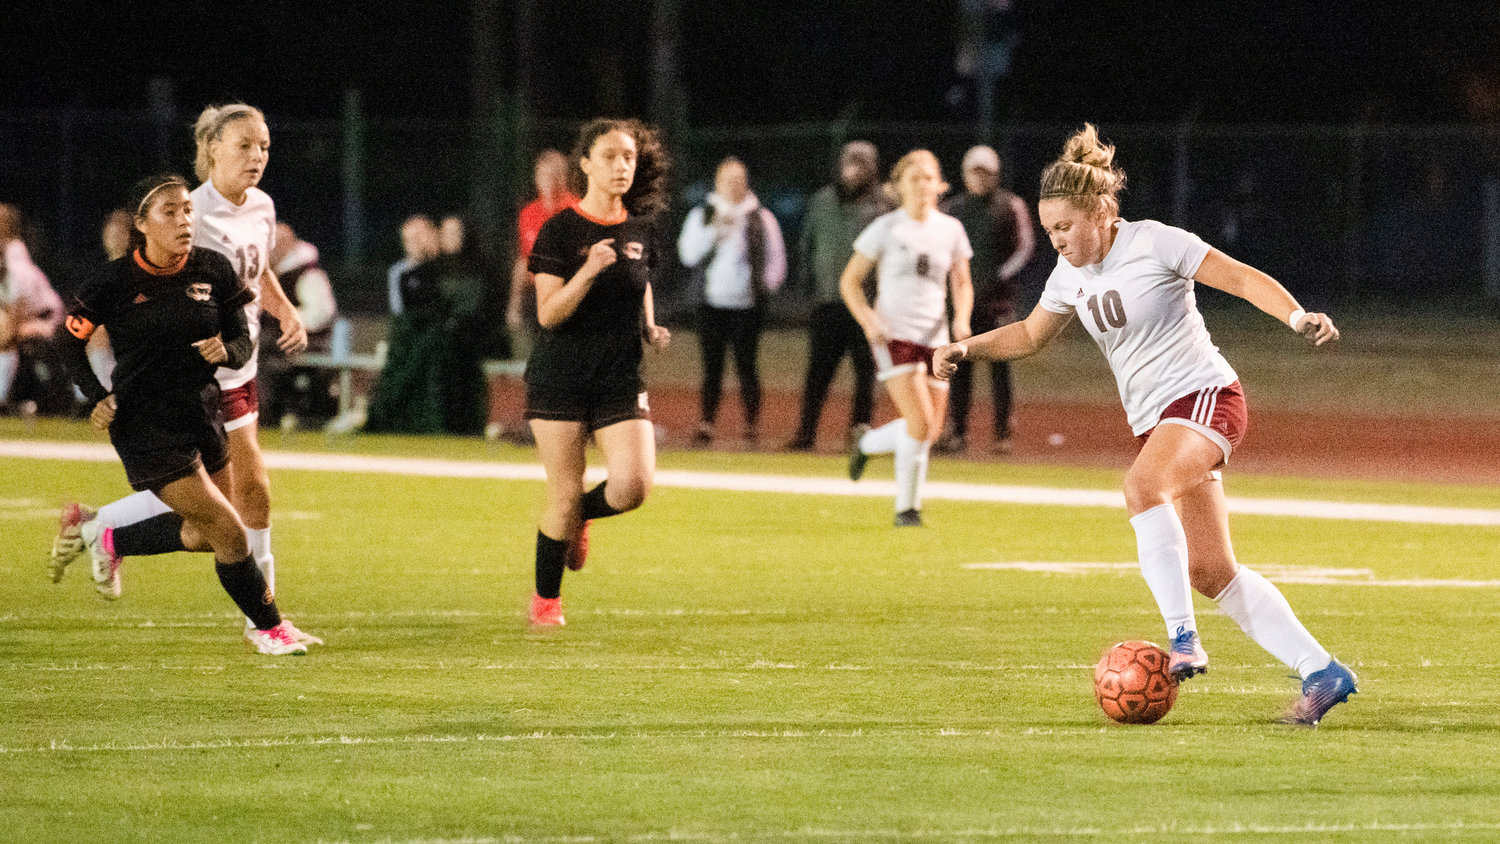 W.F. West sophomore Lena Fragner (10) takes control of the ball after scoring the first goal of the night in a game against Centralia on Thursday.